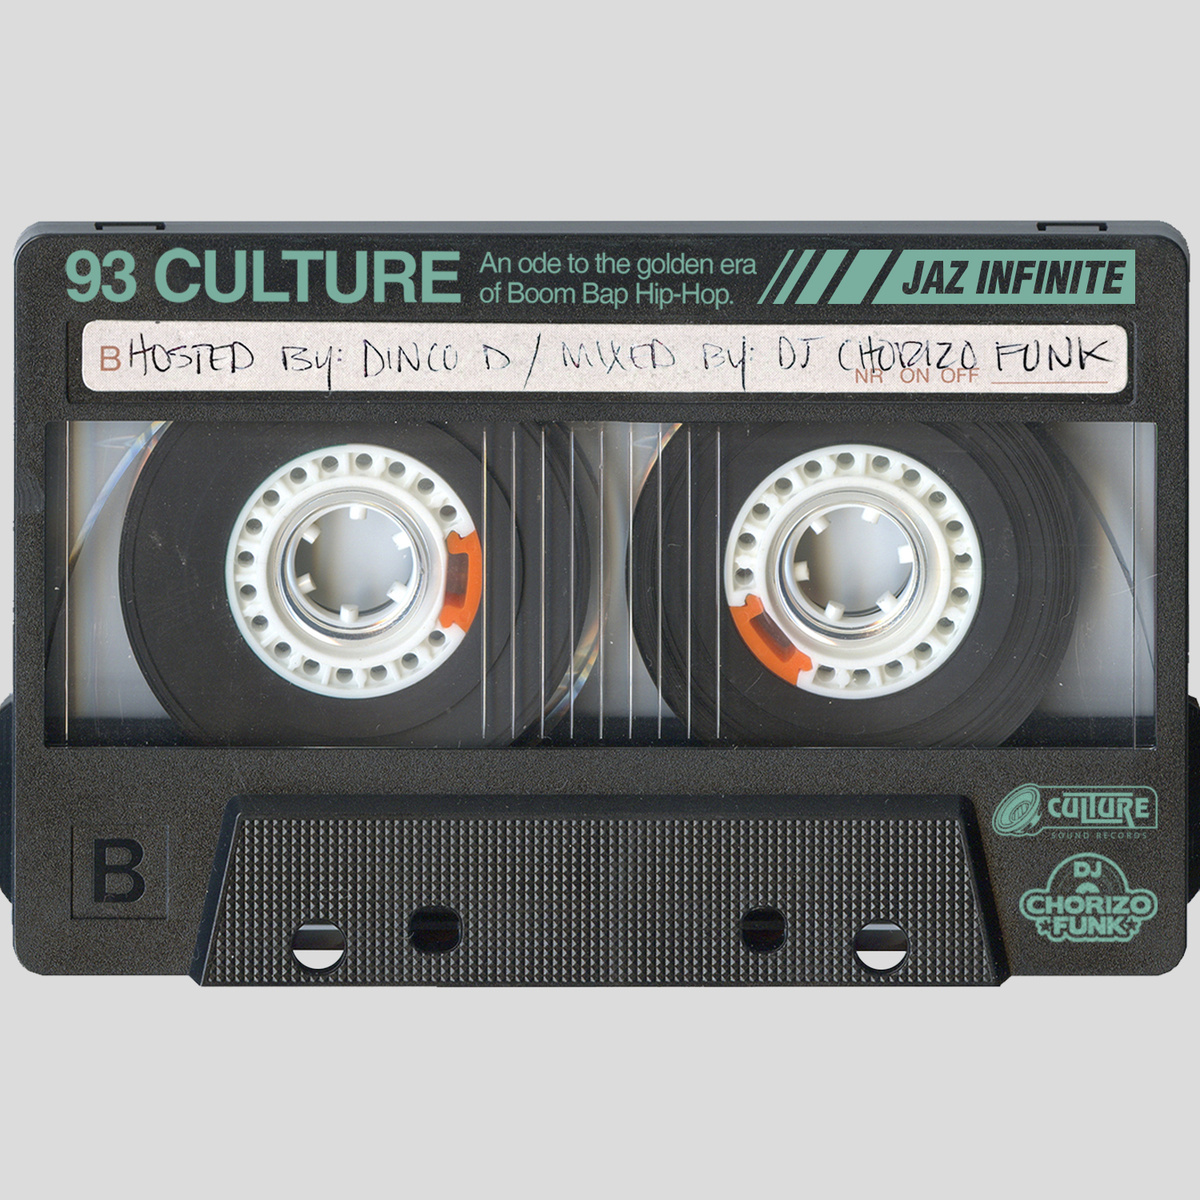 Jaz Infinite &lt;em&gt;93 Culture&lt;/em&gt; Beat Tape&lt;br&gt; Hosted by Dinco D (Leaders of the New School)&lt;br&gt; Mixed by DJ Chorizo Funk